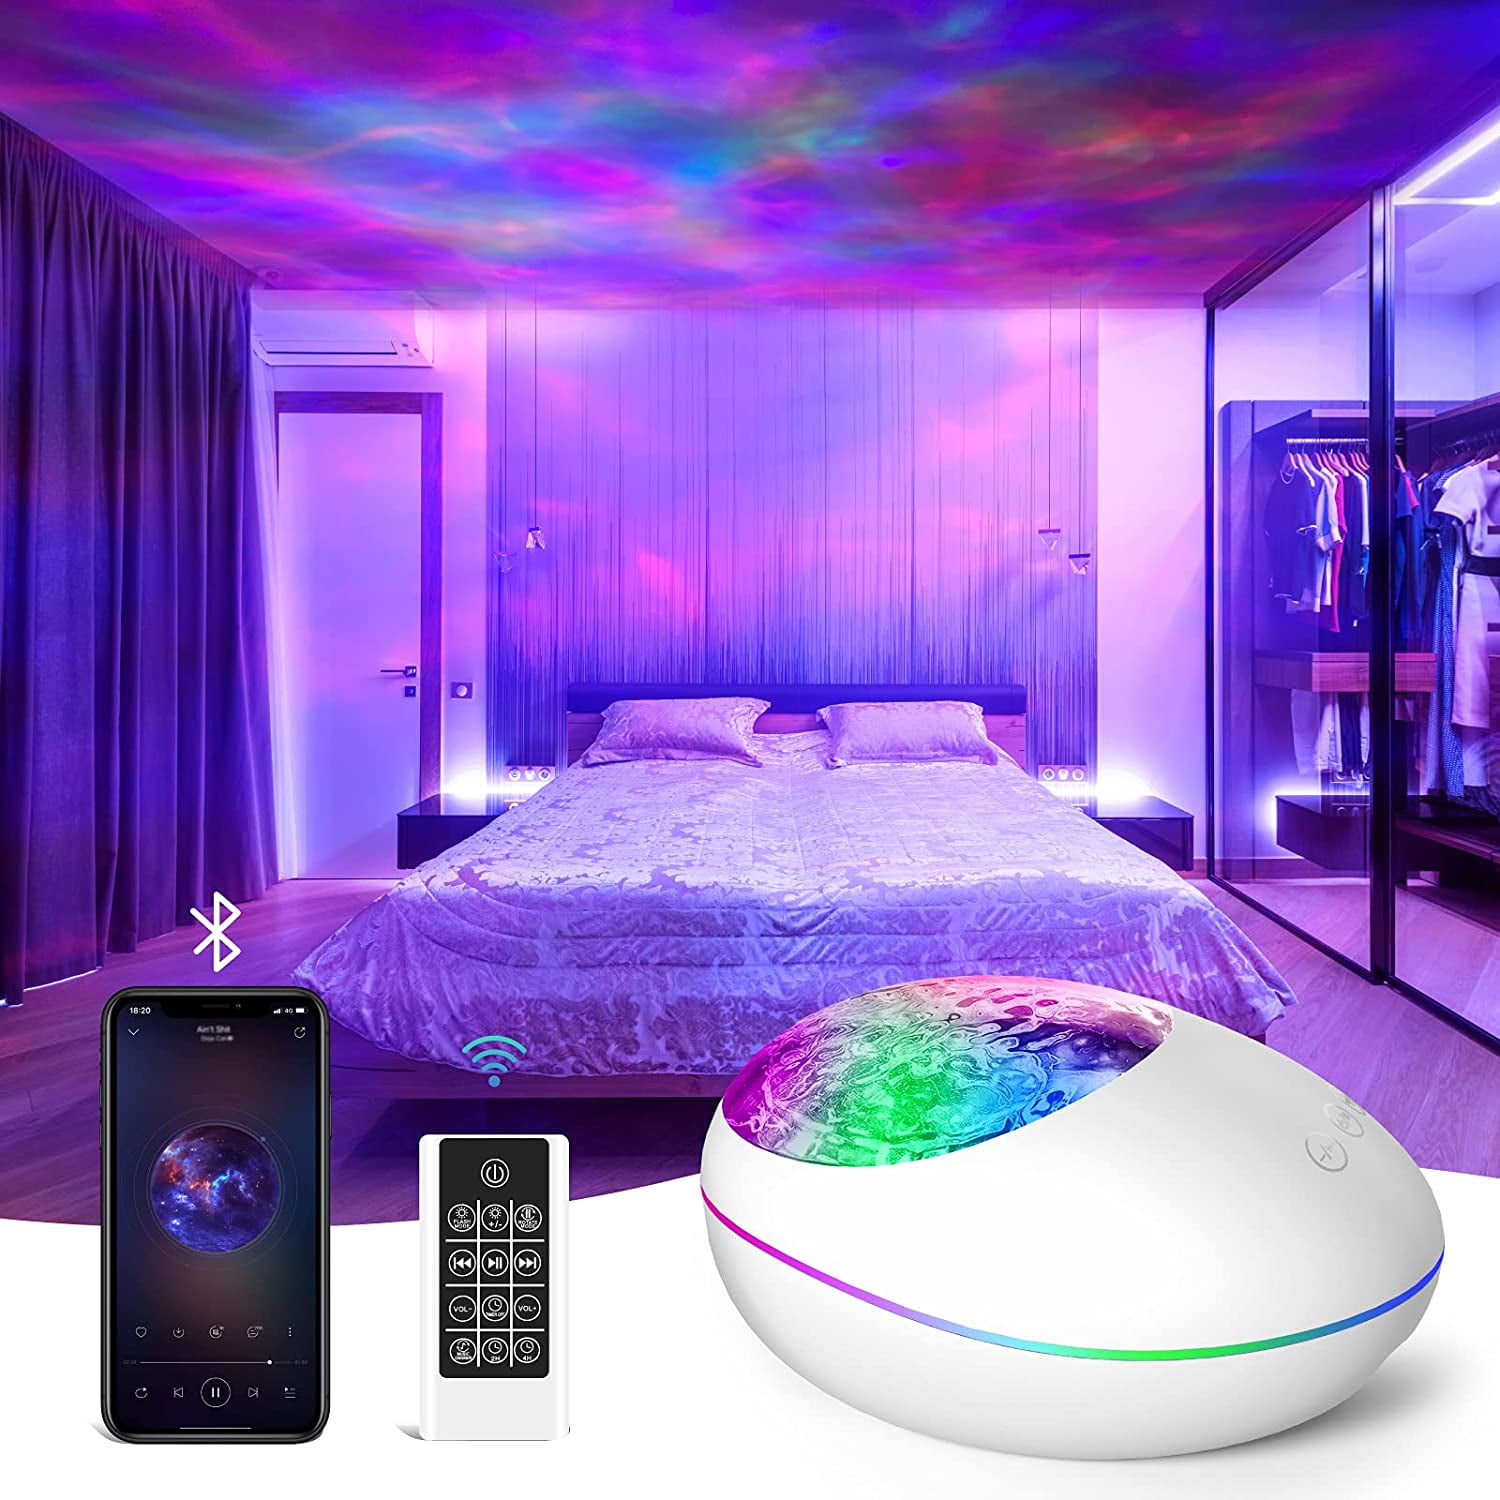 SEE VIDEO Sky Star Lamp Projector Night Light for kids bedroom 